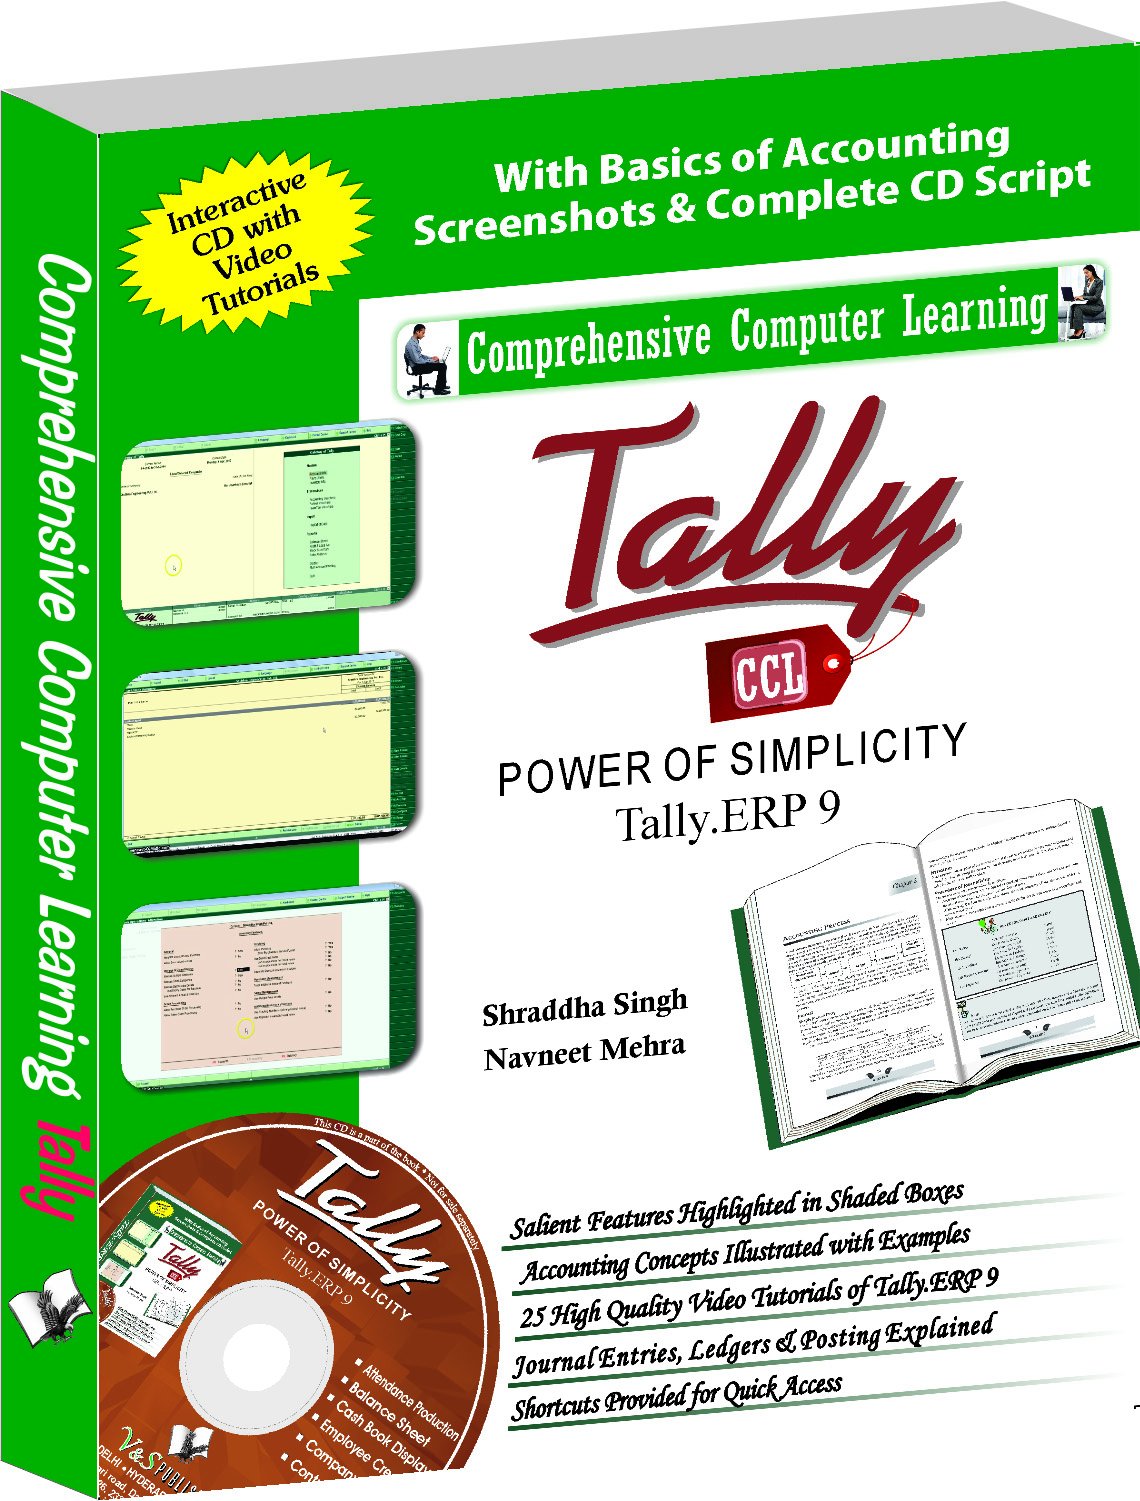 tally 7.2 free download full version with crack for windows 10 64 bit